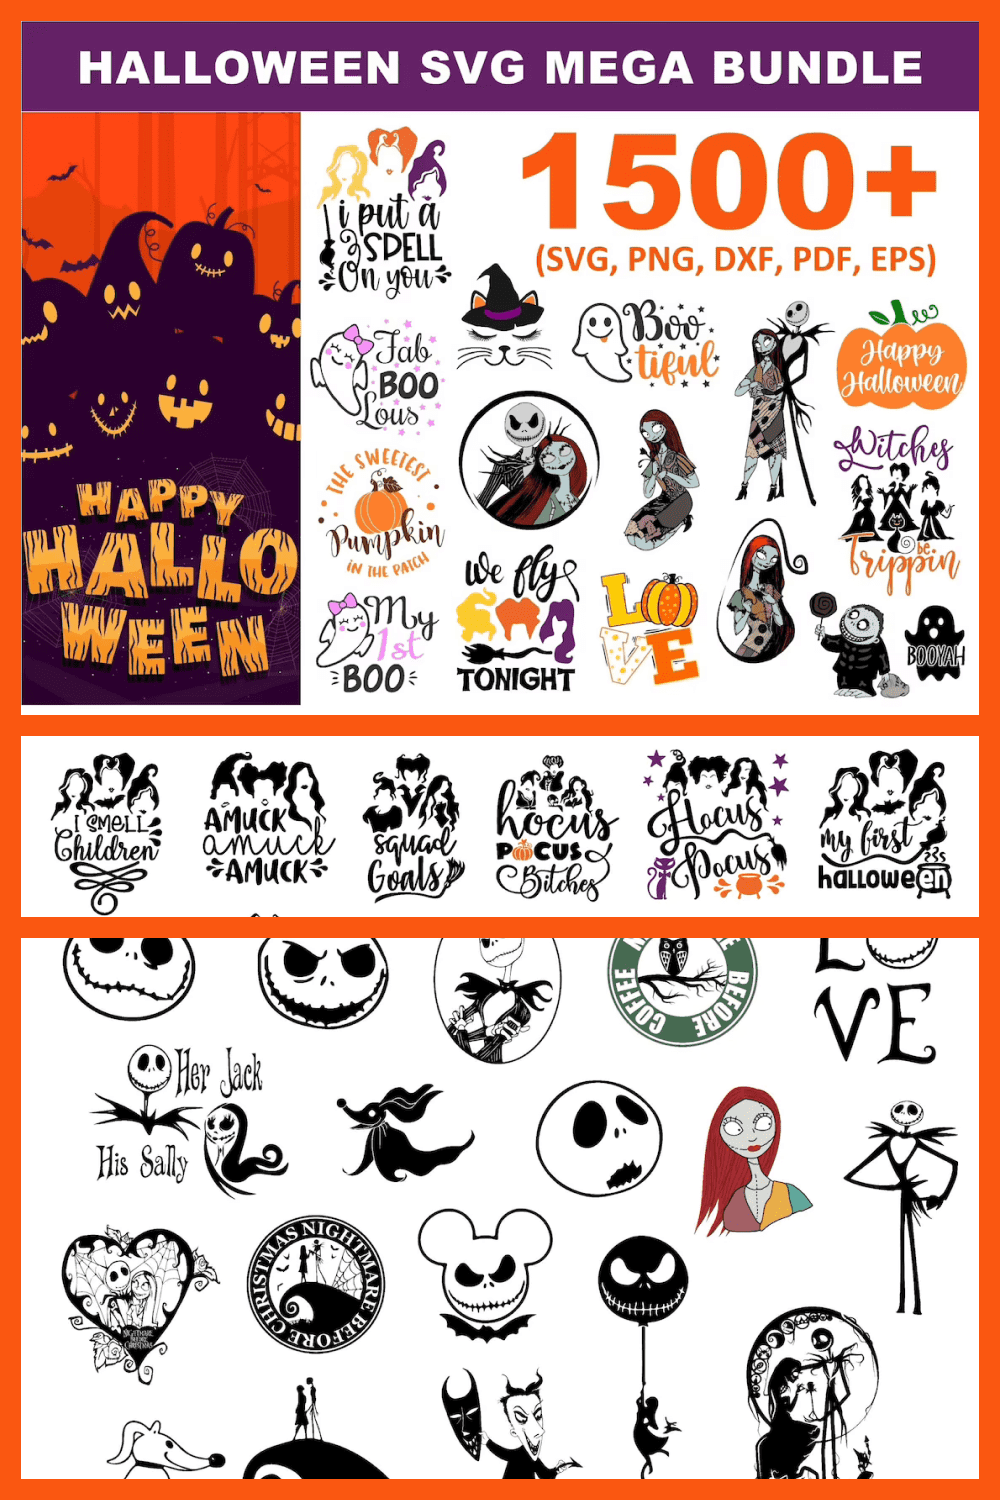 Various elements for Halloween from various famous cartoons.